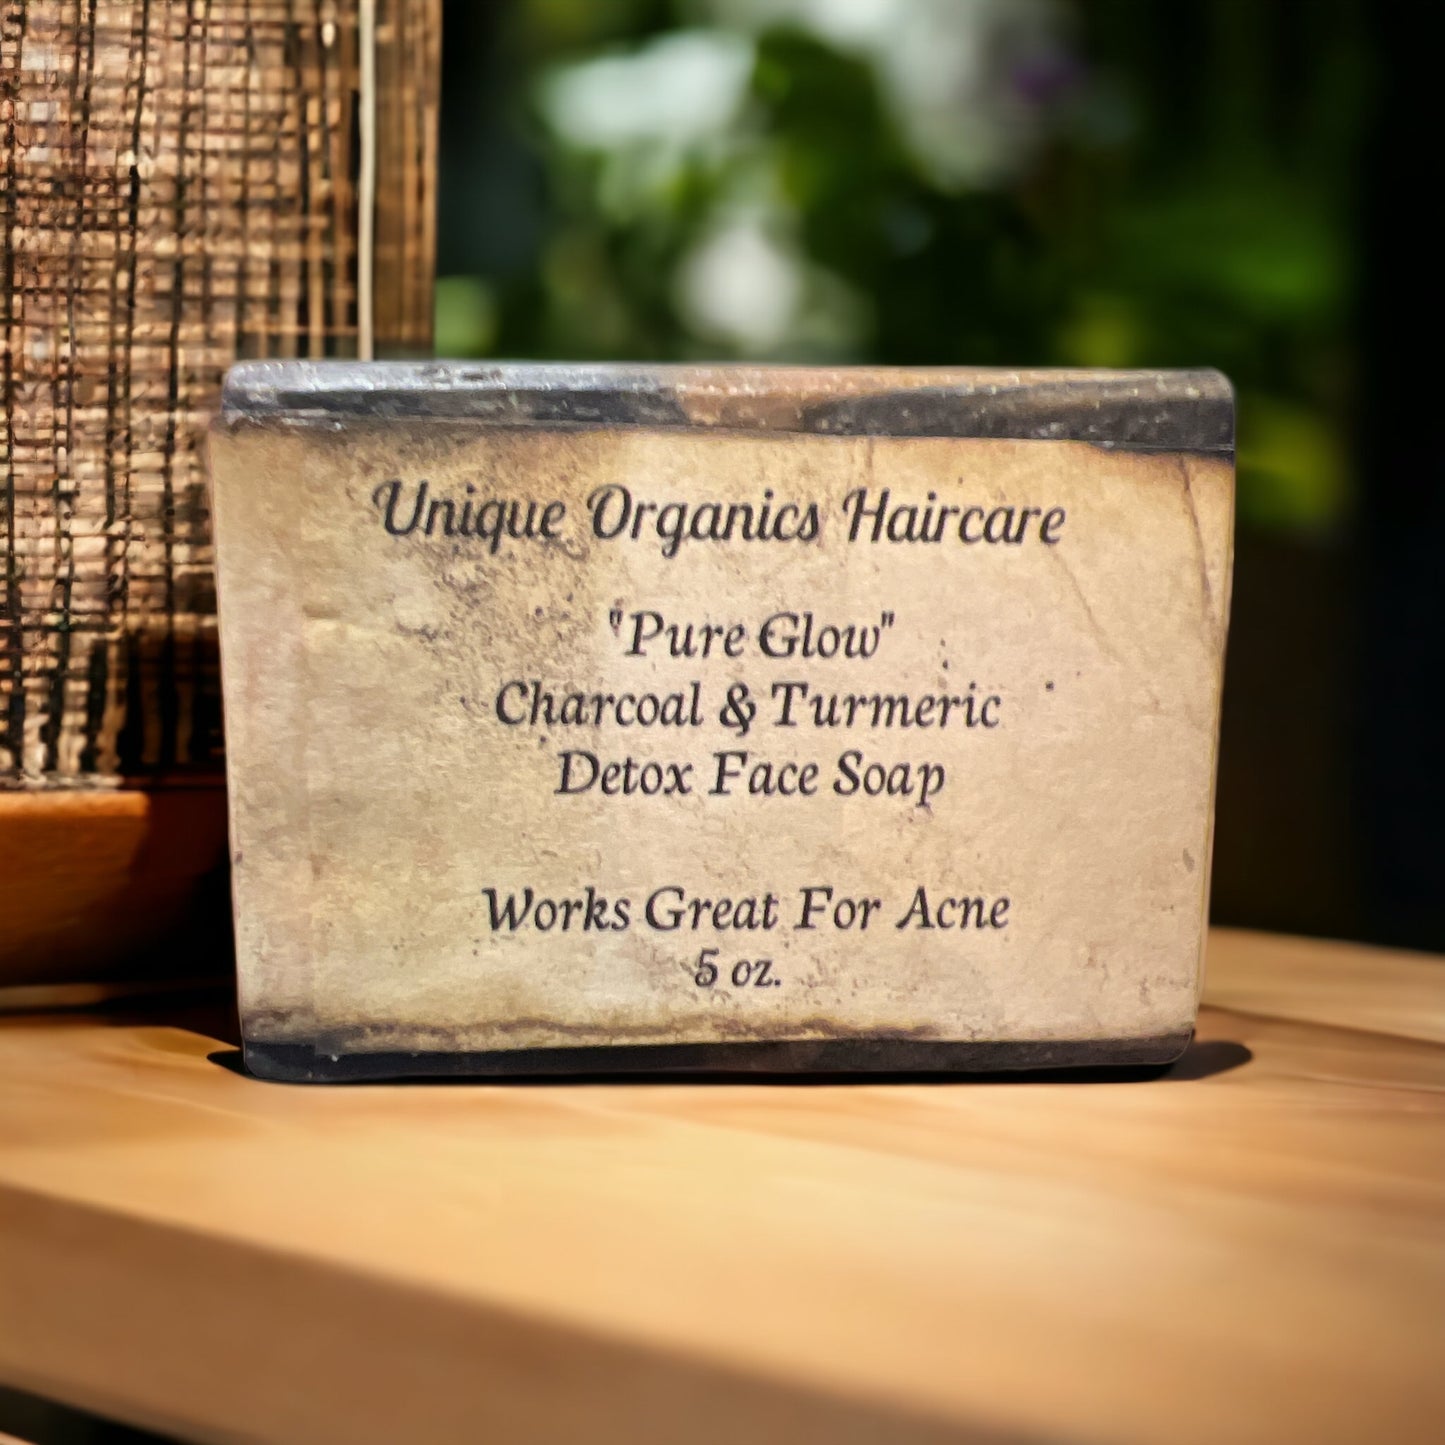 "Pure Glow"  Charcoal and Turmeric Detox Face Soap